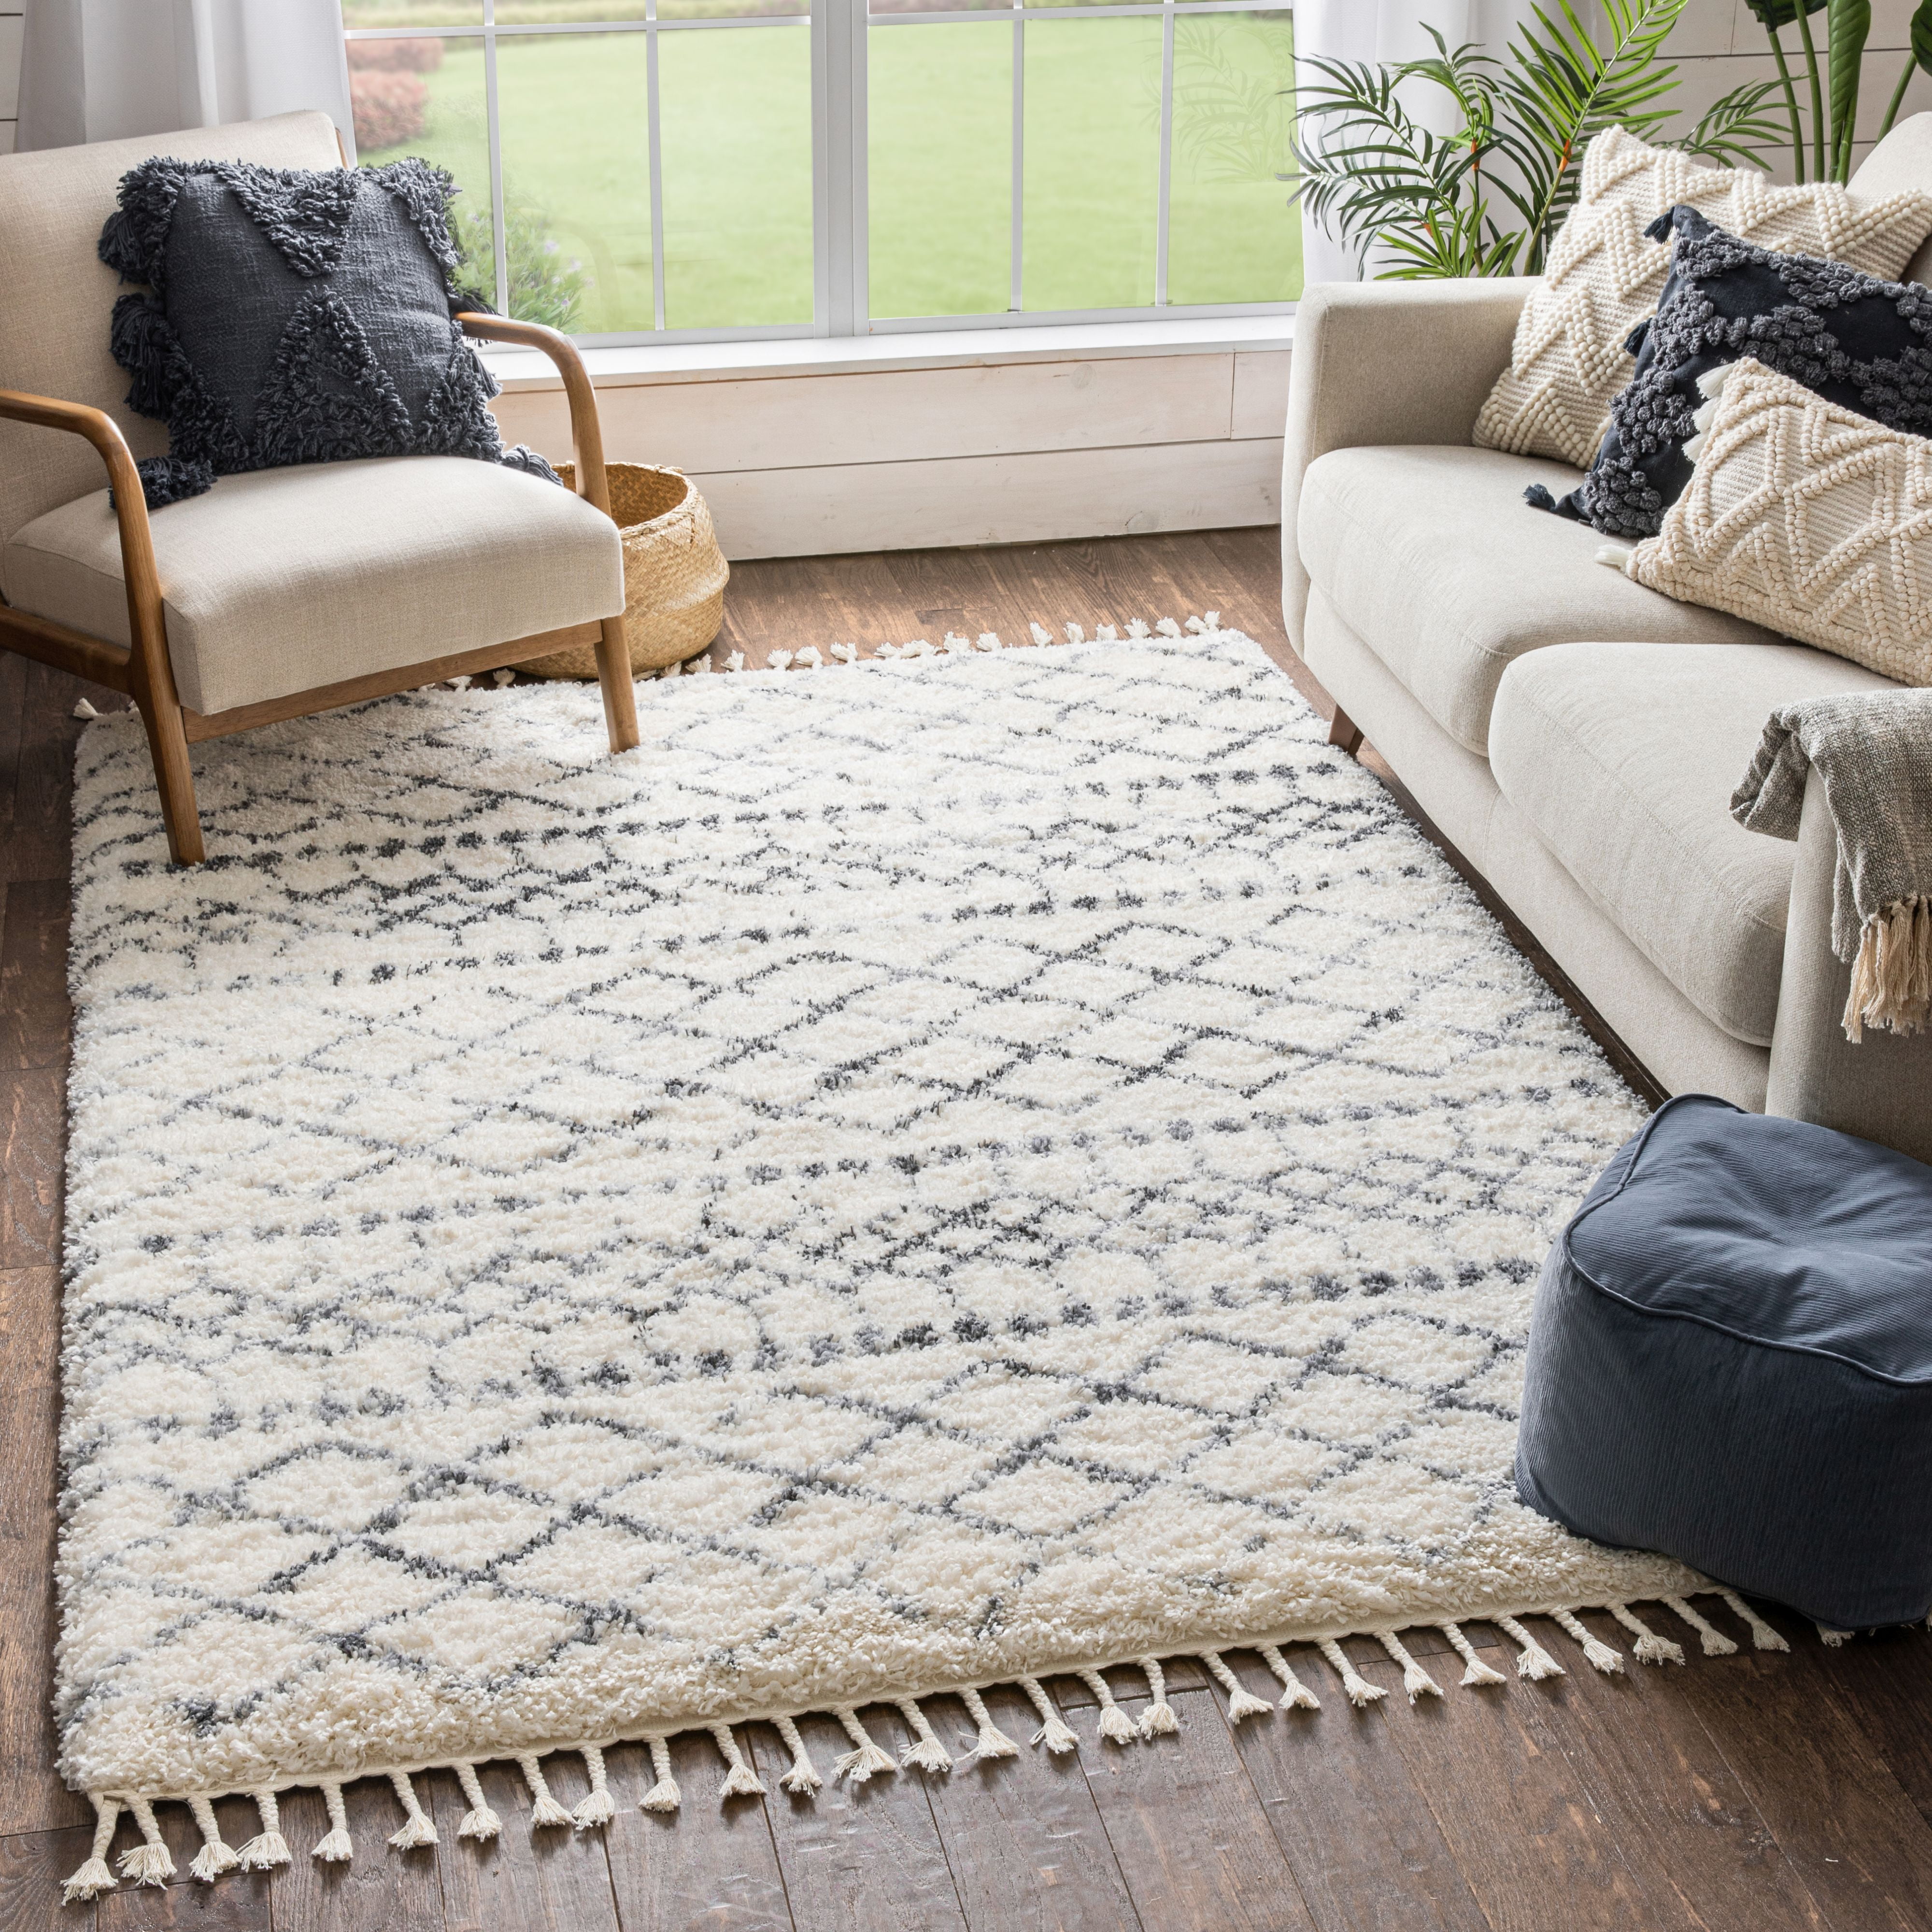 Cosy Cream Shaggy Rugs Thick Aztec Non Shed Cheap Living Room Rug Hall Runners 